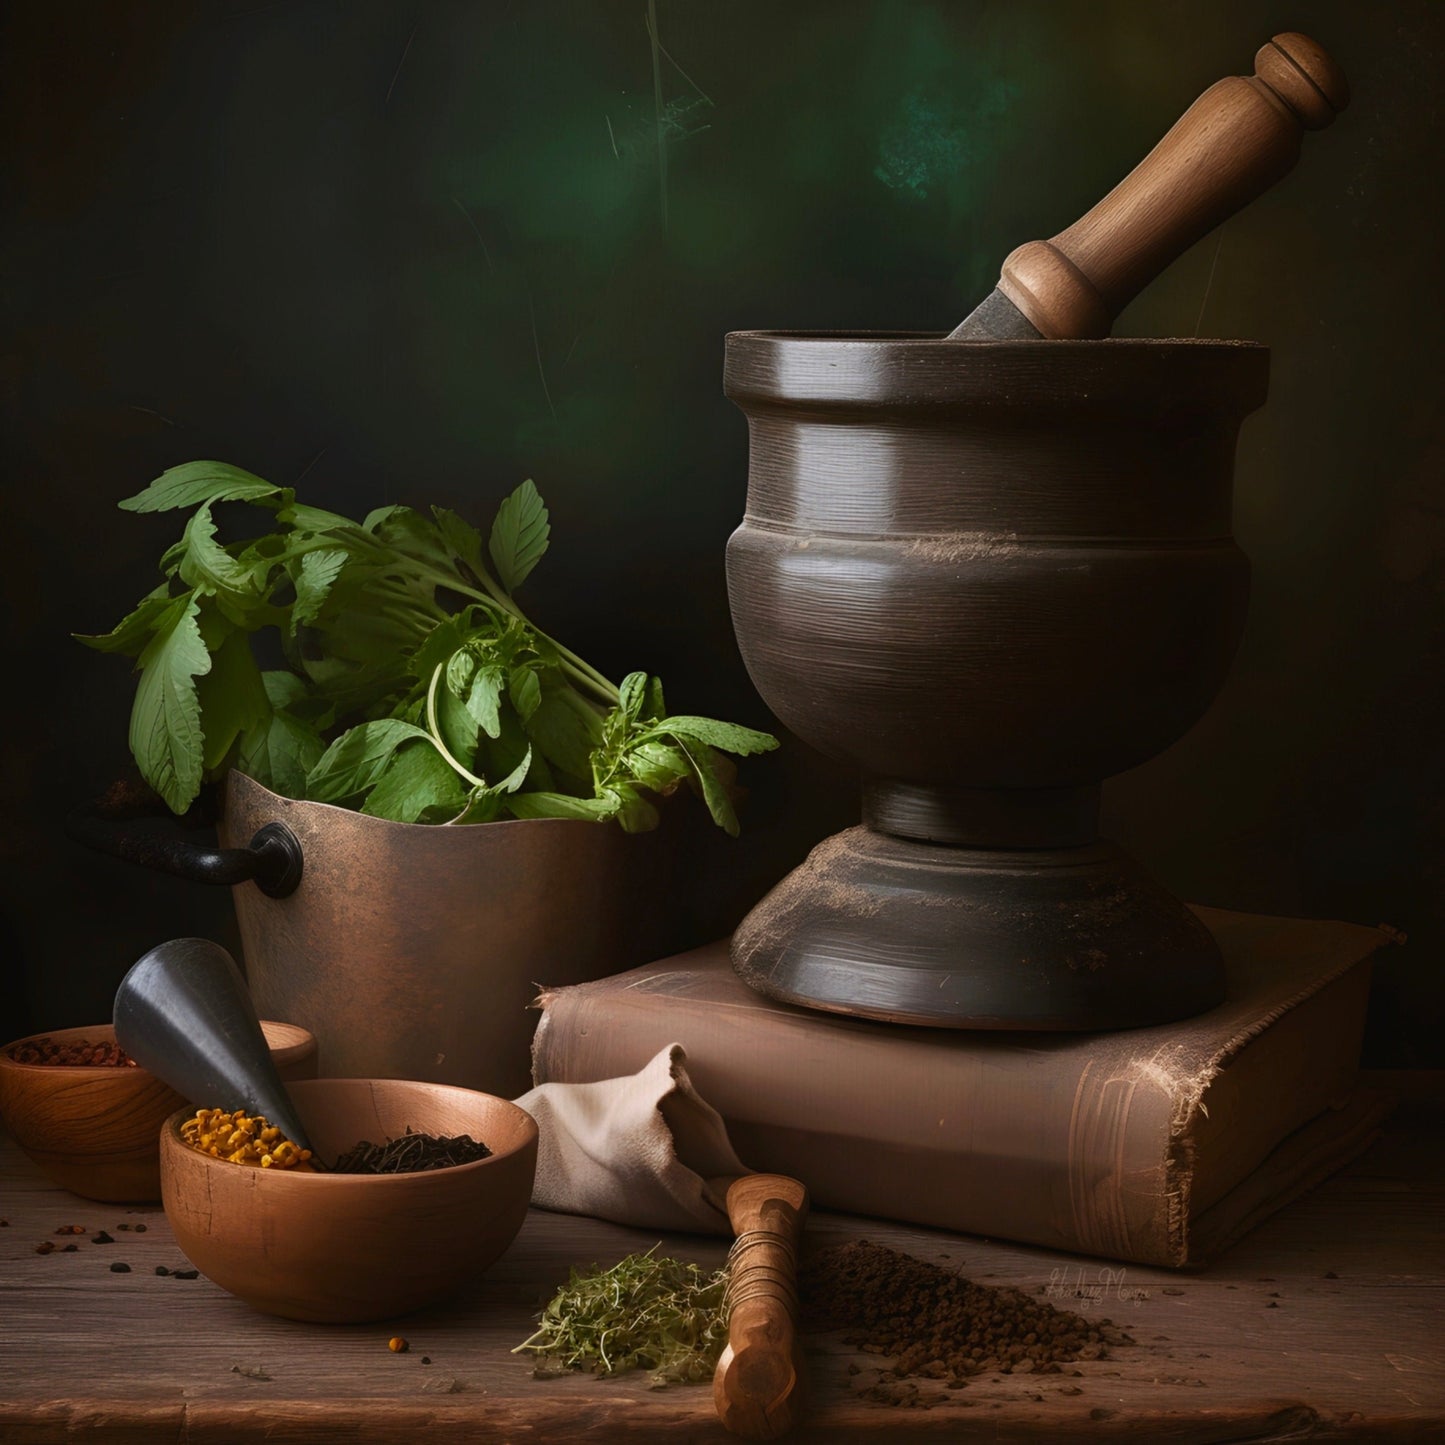 Mortar and Pestle with Herbs